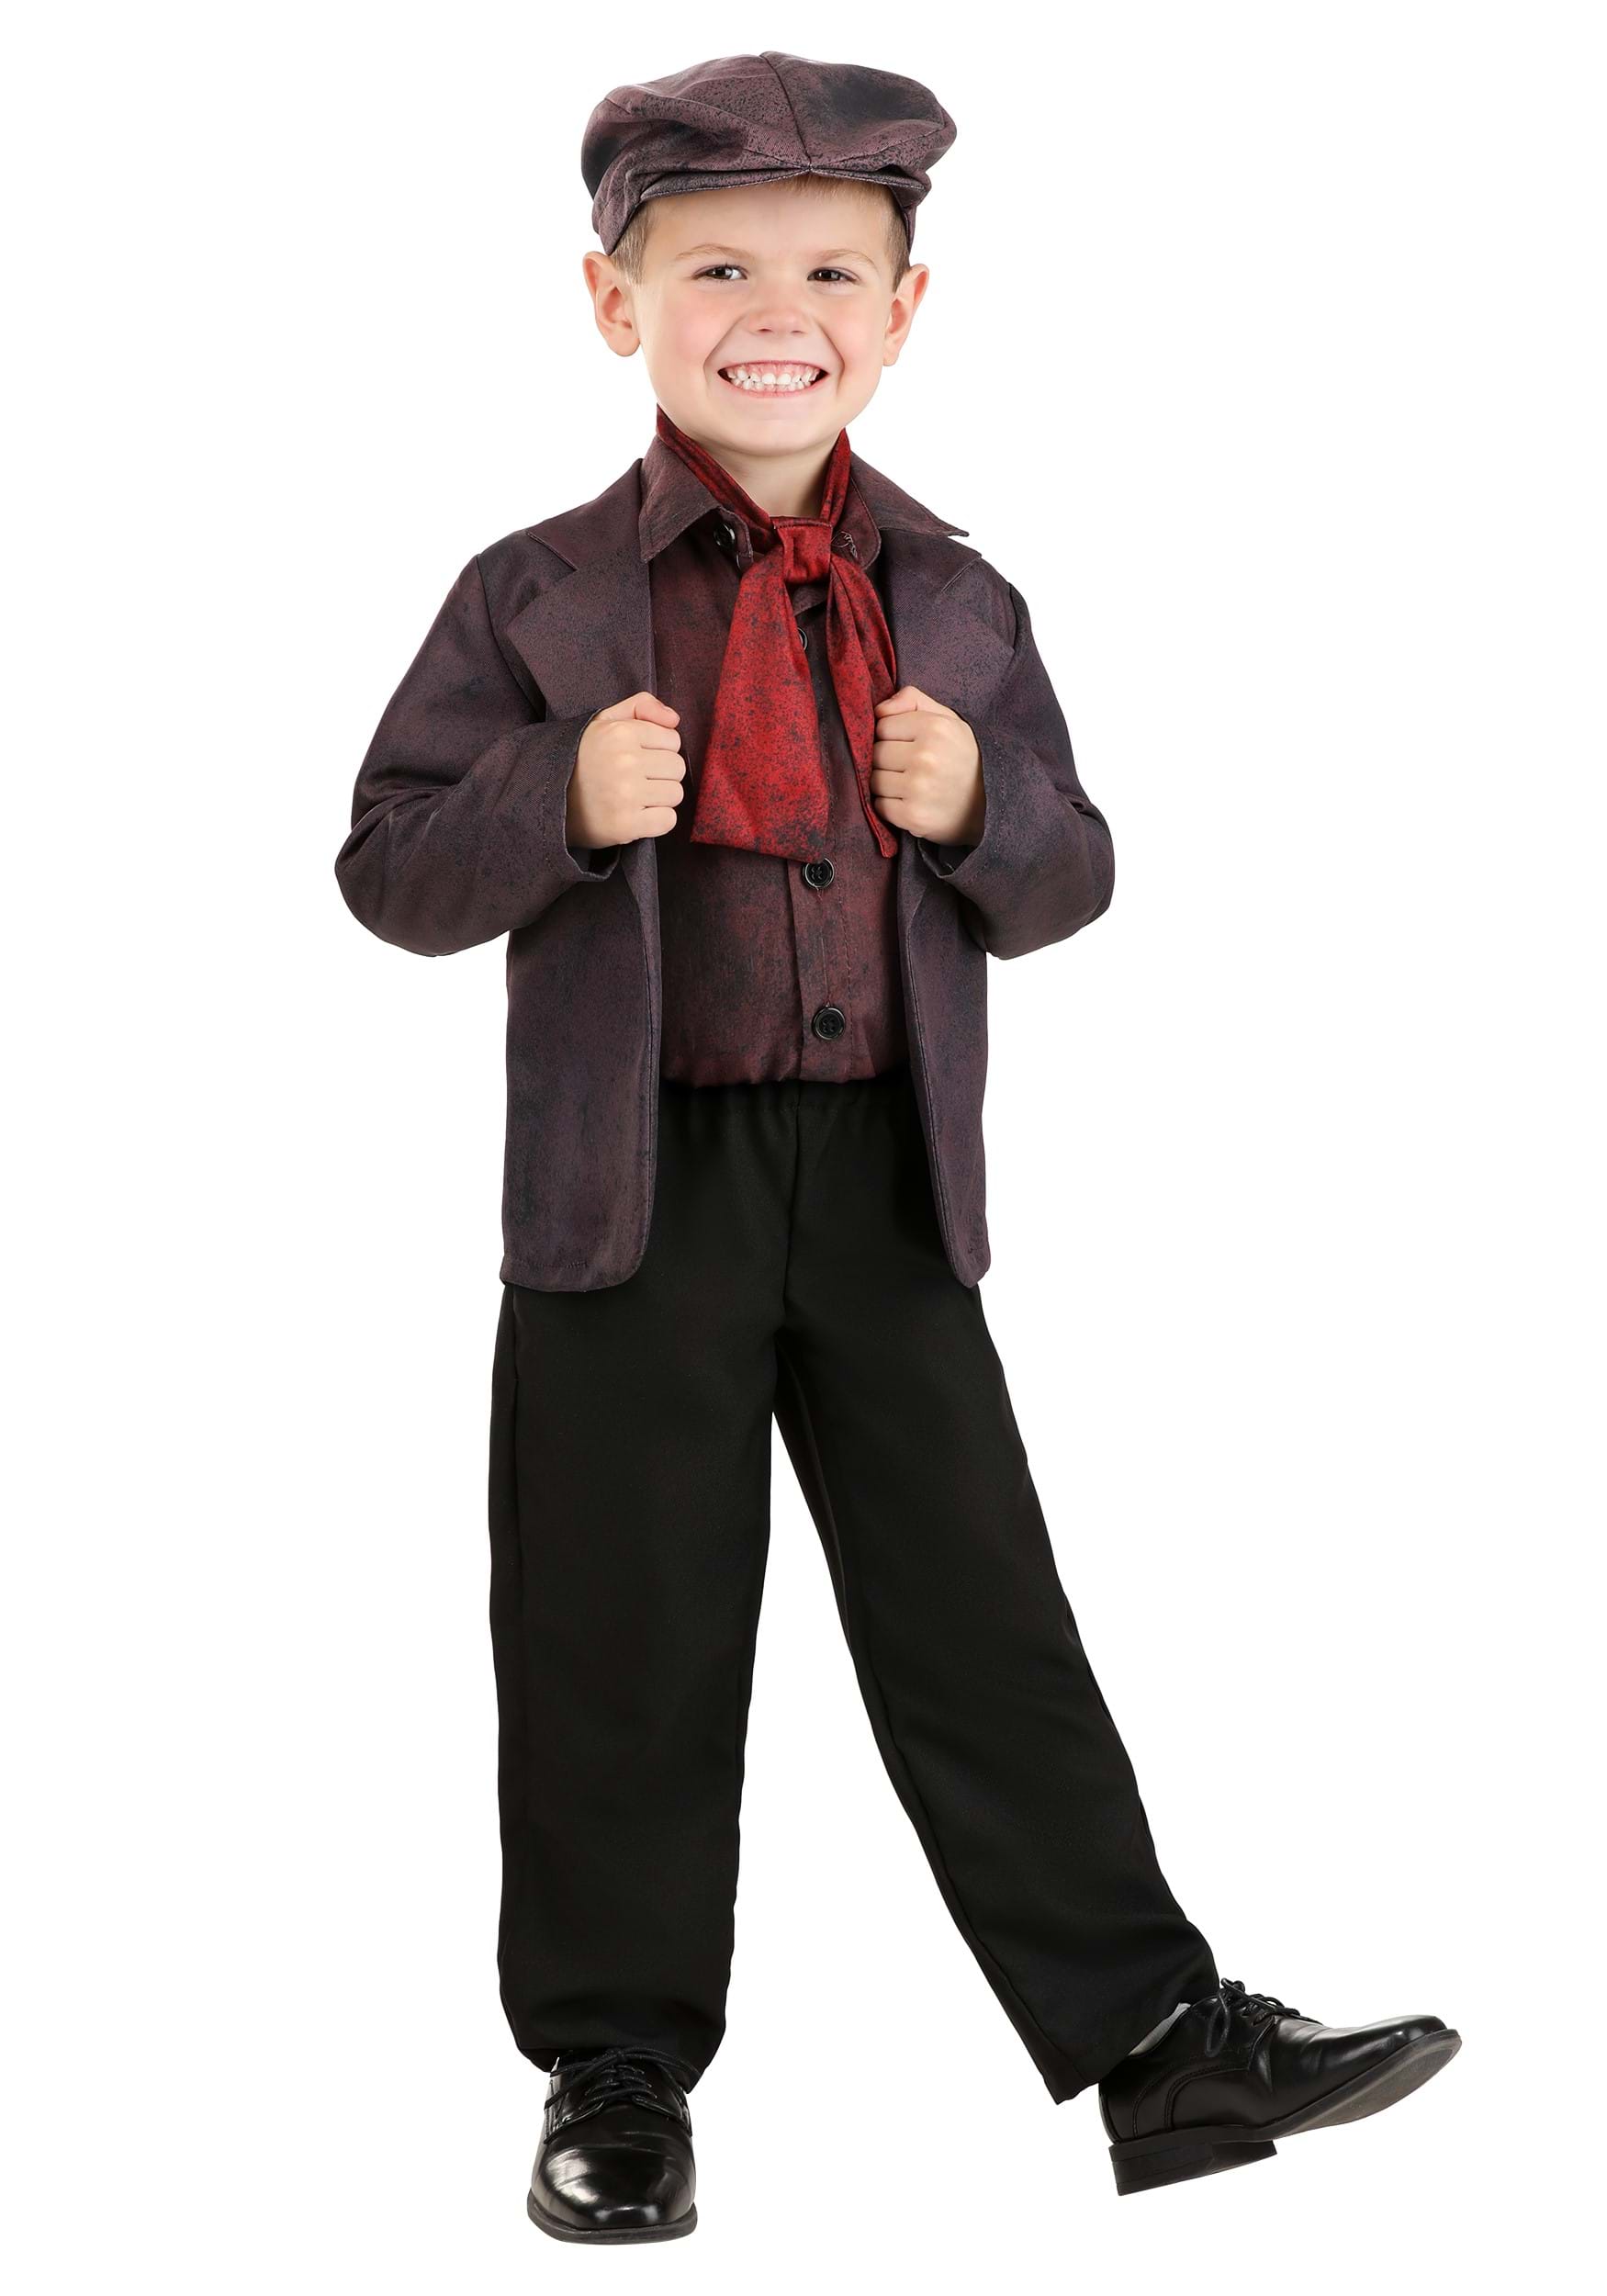 Photos - Fancy Dress Mary Poppins FUN Costumes  Bert Toddler Costume Brown 